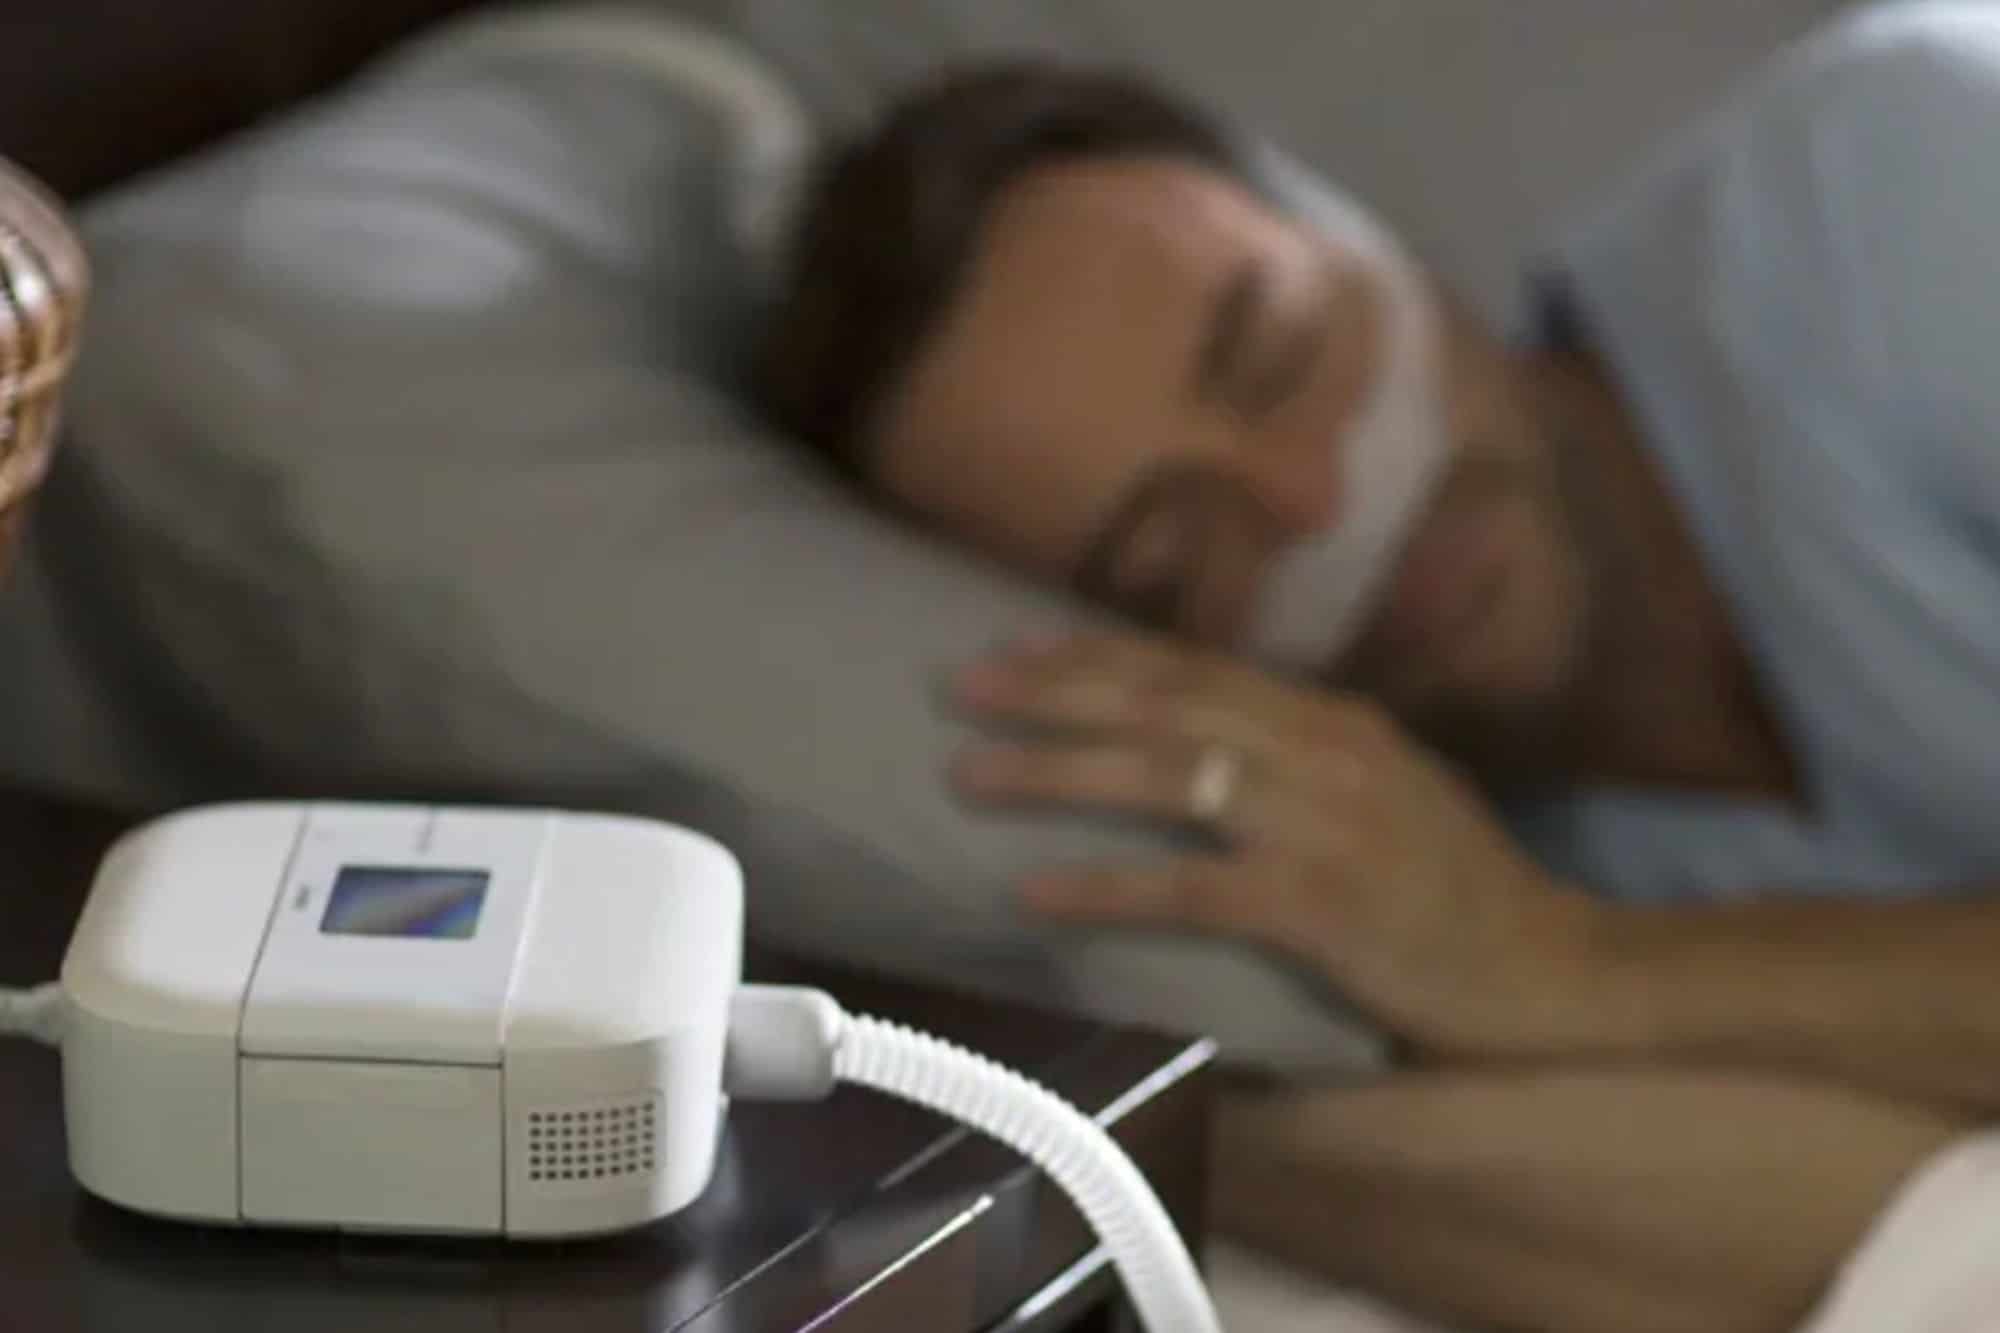 Personal Injury Lawyer for Philips CPAP or Ventilator Injuries